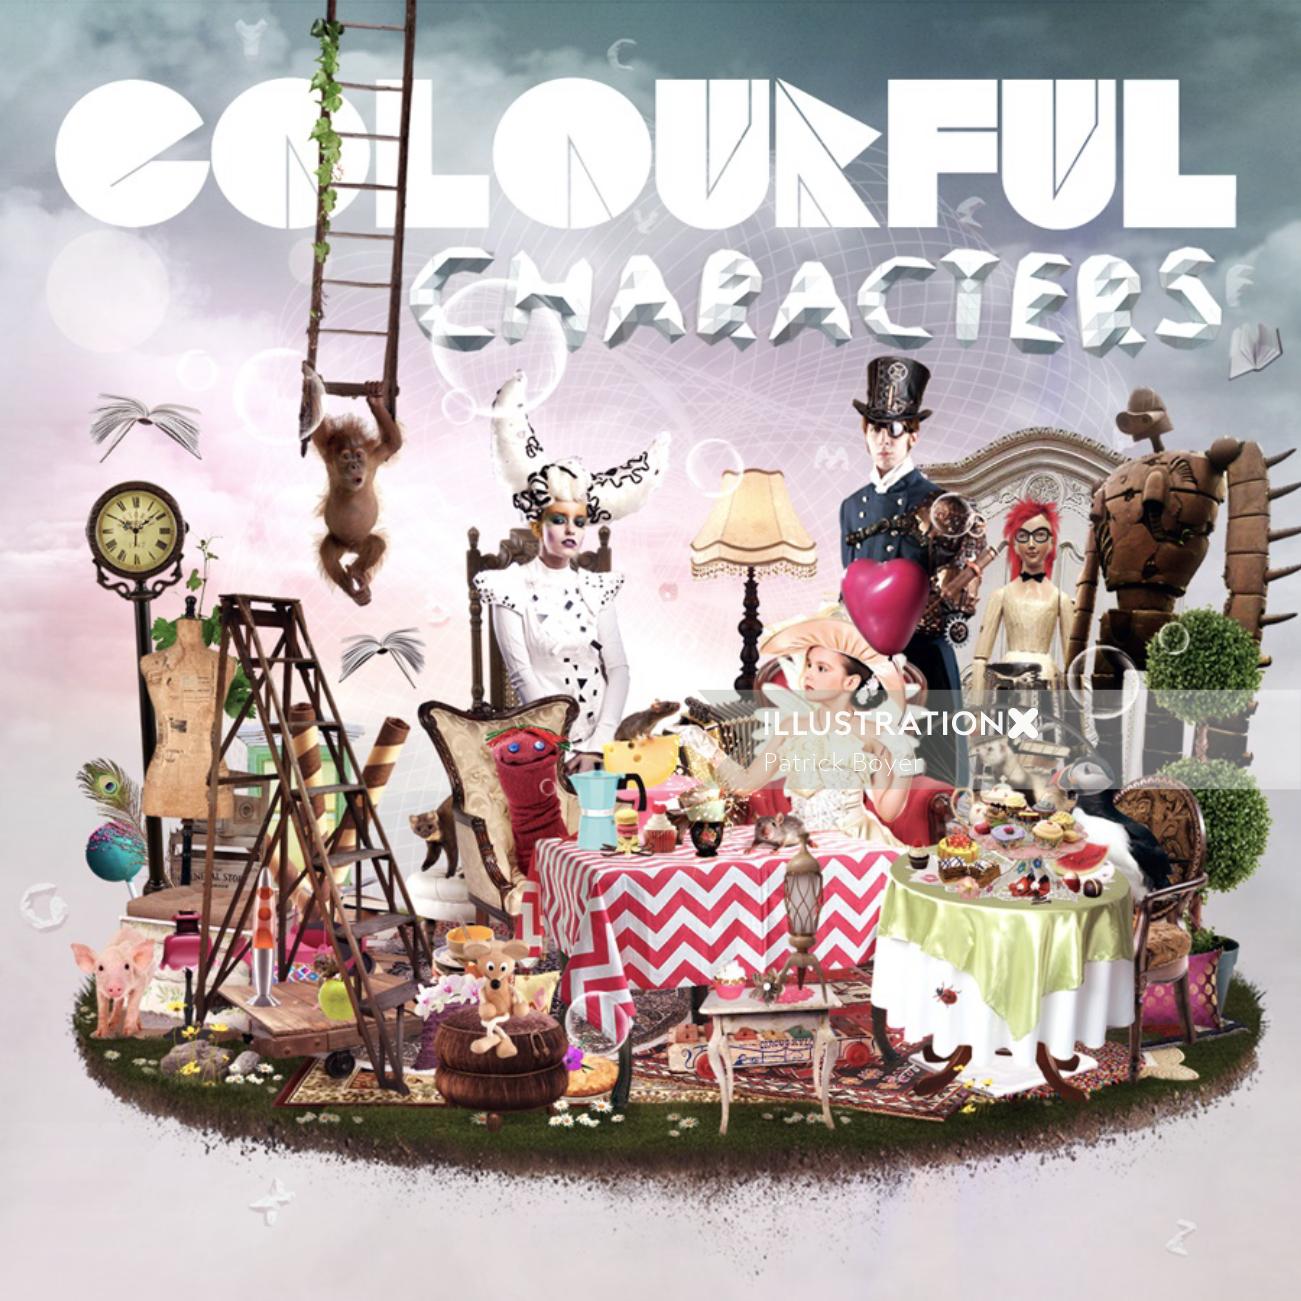 Coloful characters of people
